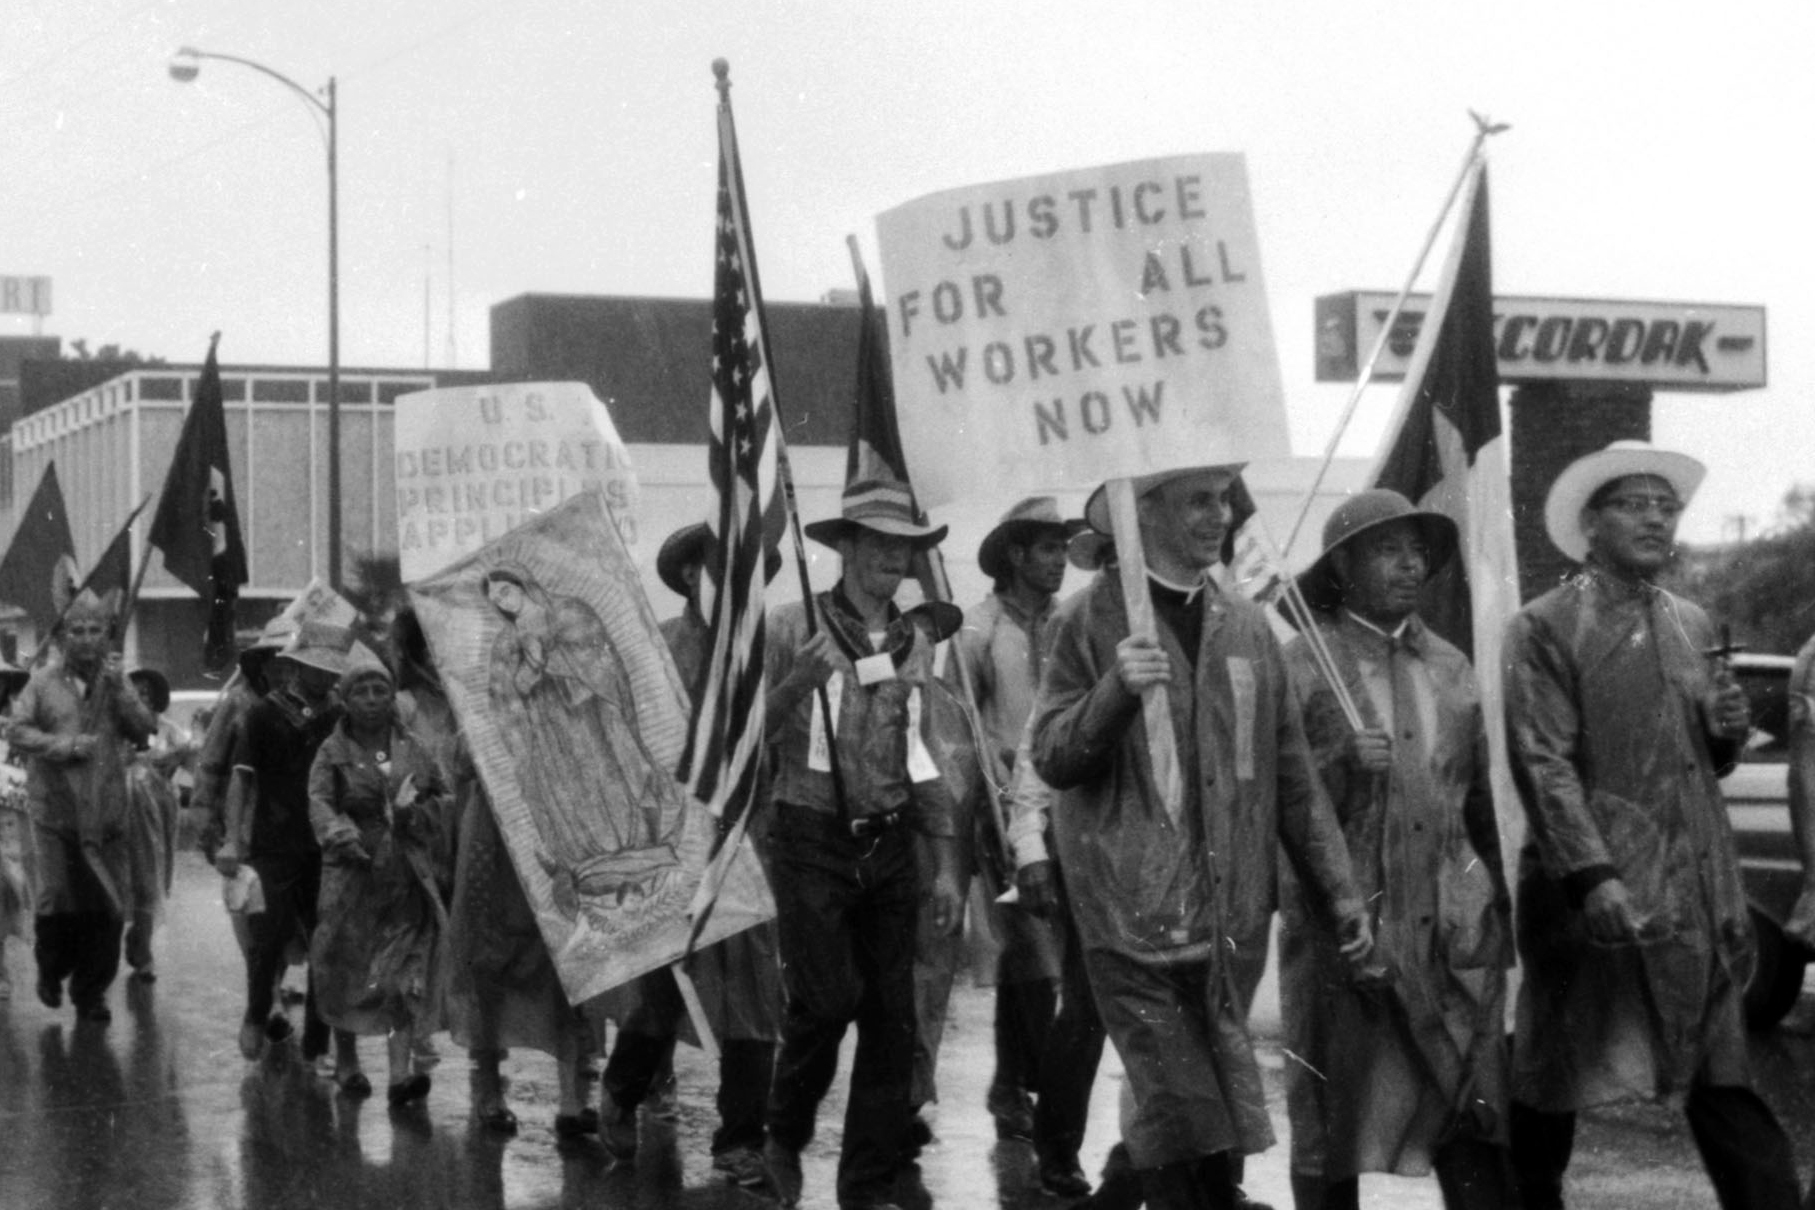 The 1966 Rio Grande Valley Farm Workers March (“La Marcha”). August 27, 1966. Via the University of Texas-San Antonio Libraries' Special Collections (MS 360: E-0012-187-D-16)